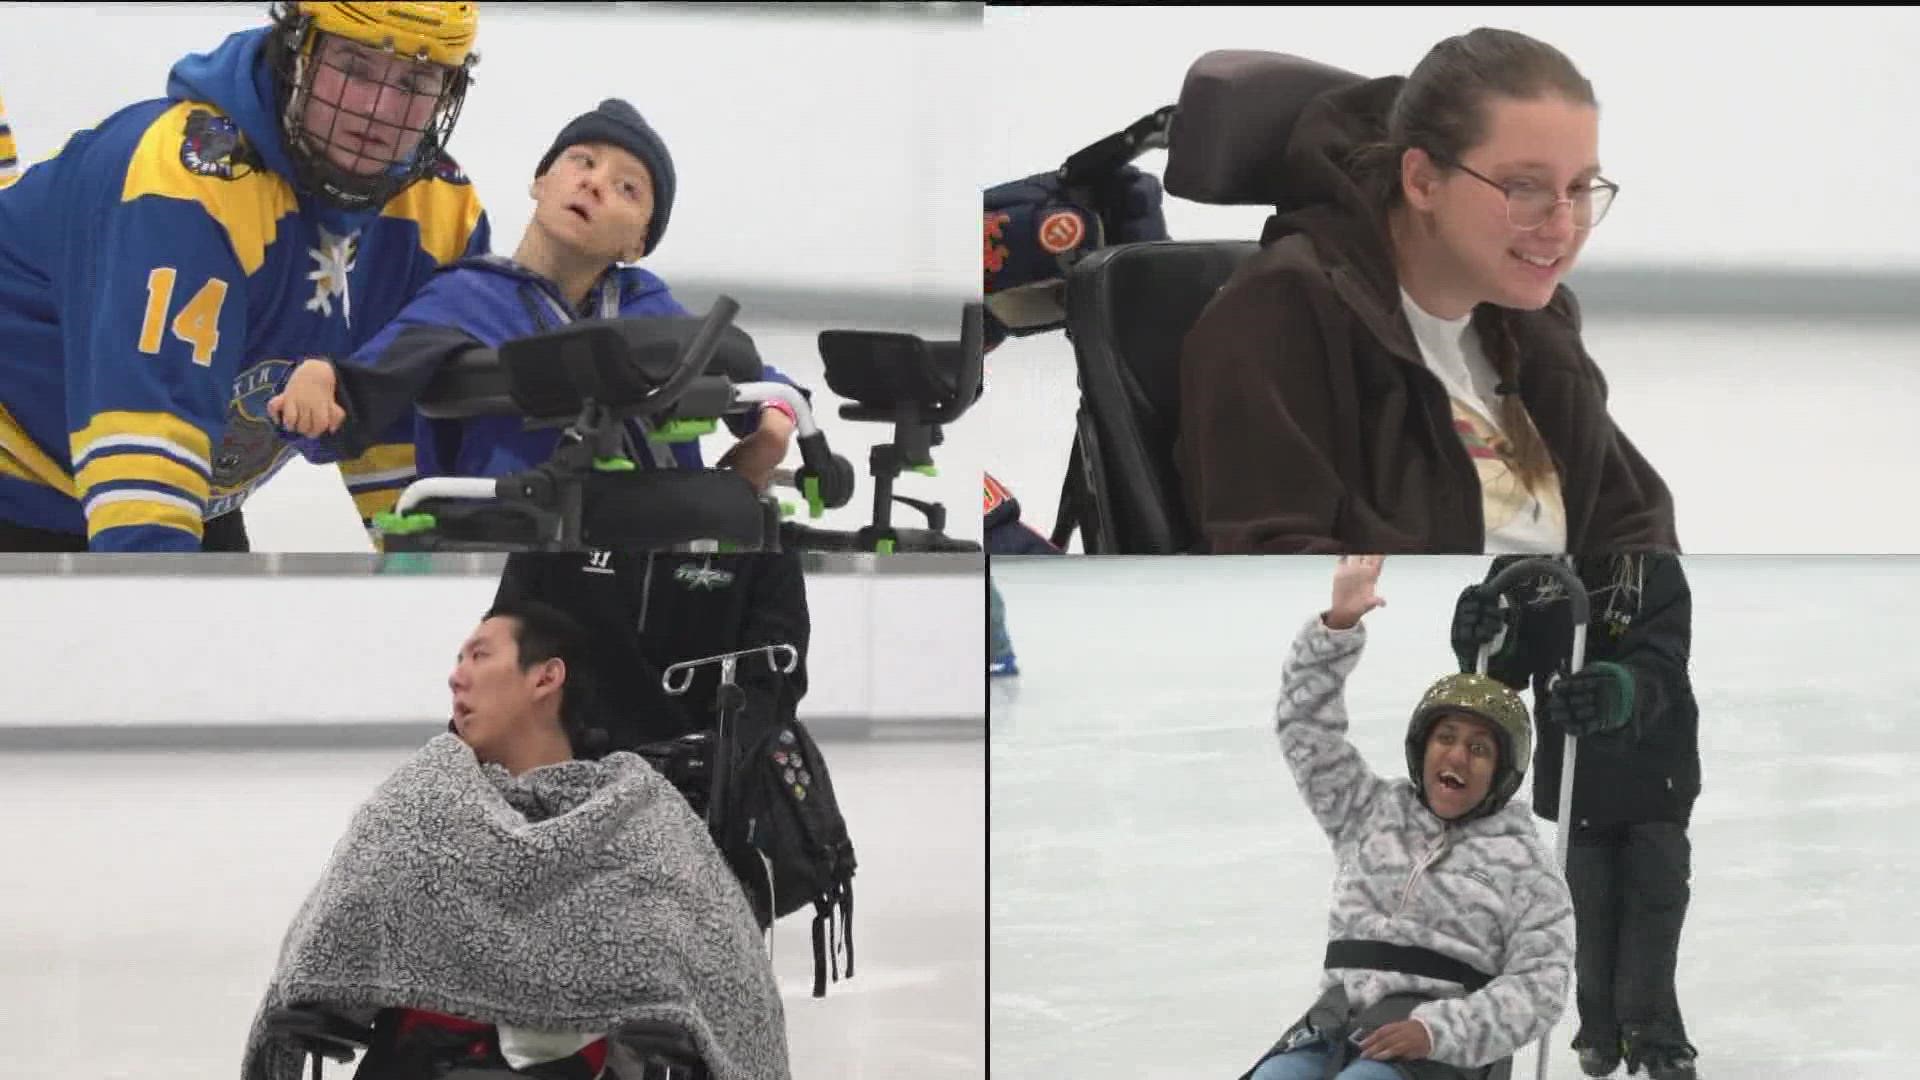 The most recent adventure was ice skating, but CPATH has also taken members rock climbing, rowing and more.